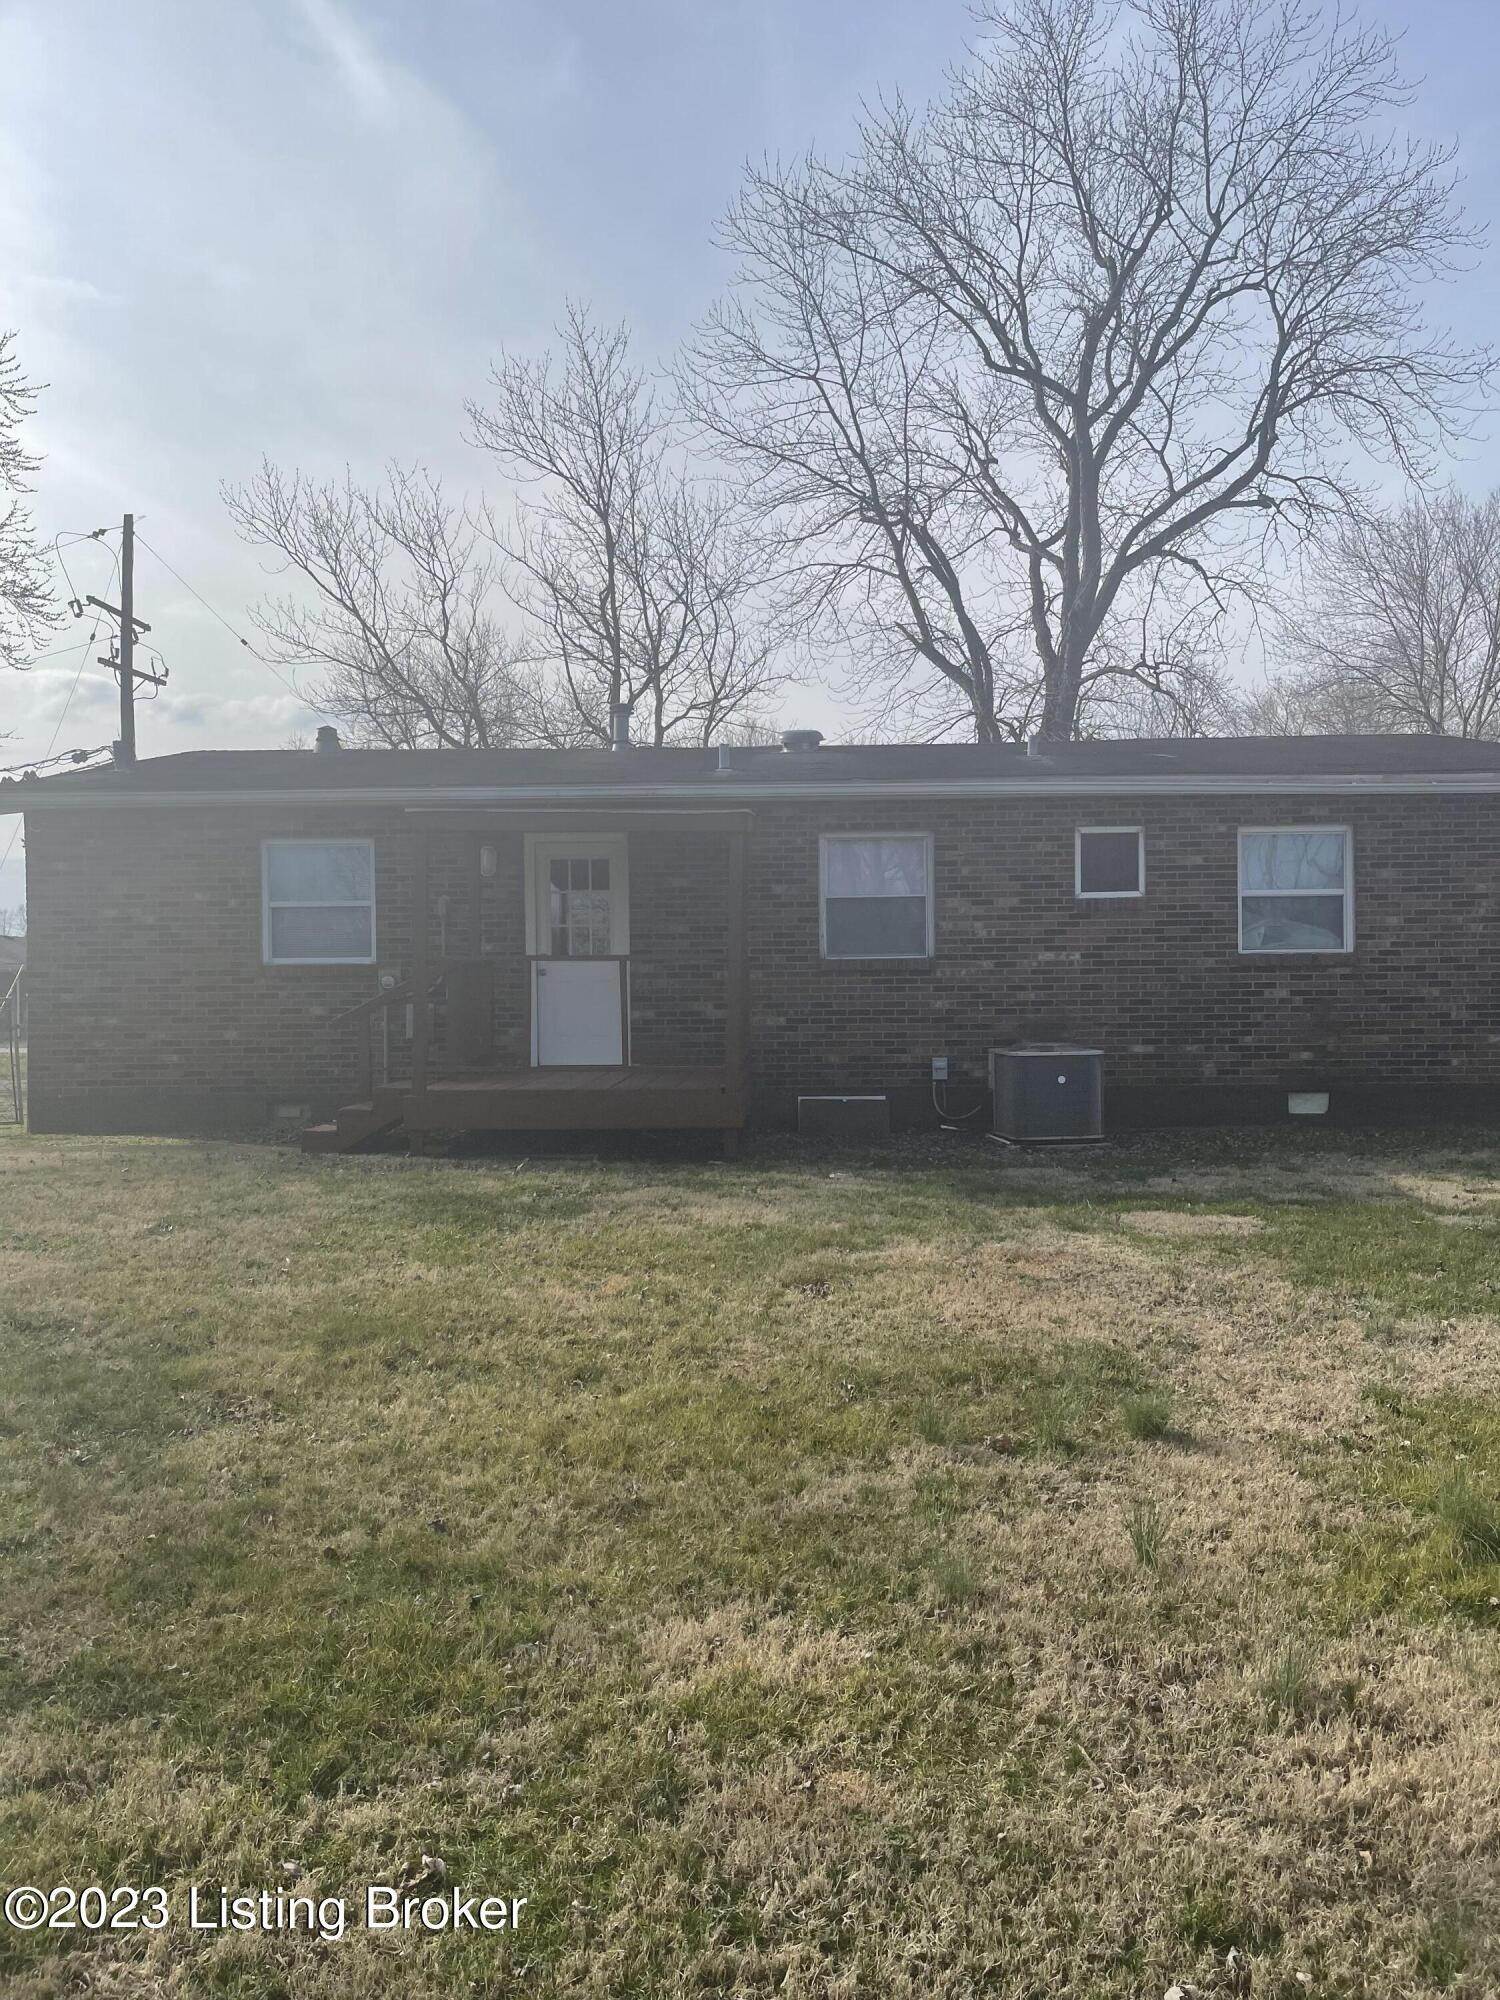 11. Single Family at Louisville, KY 40258